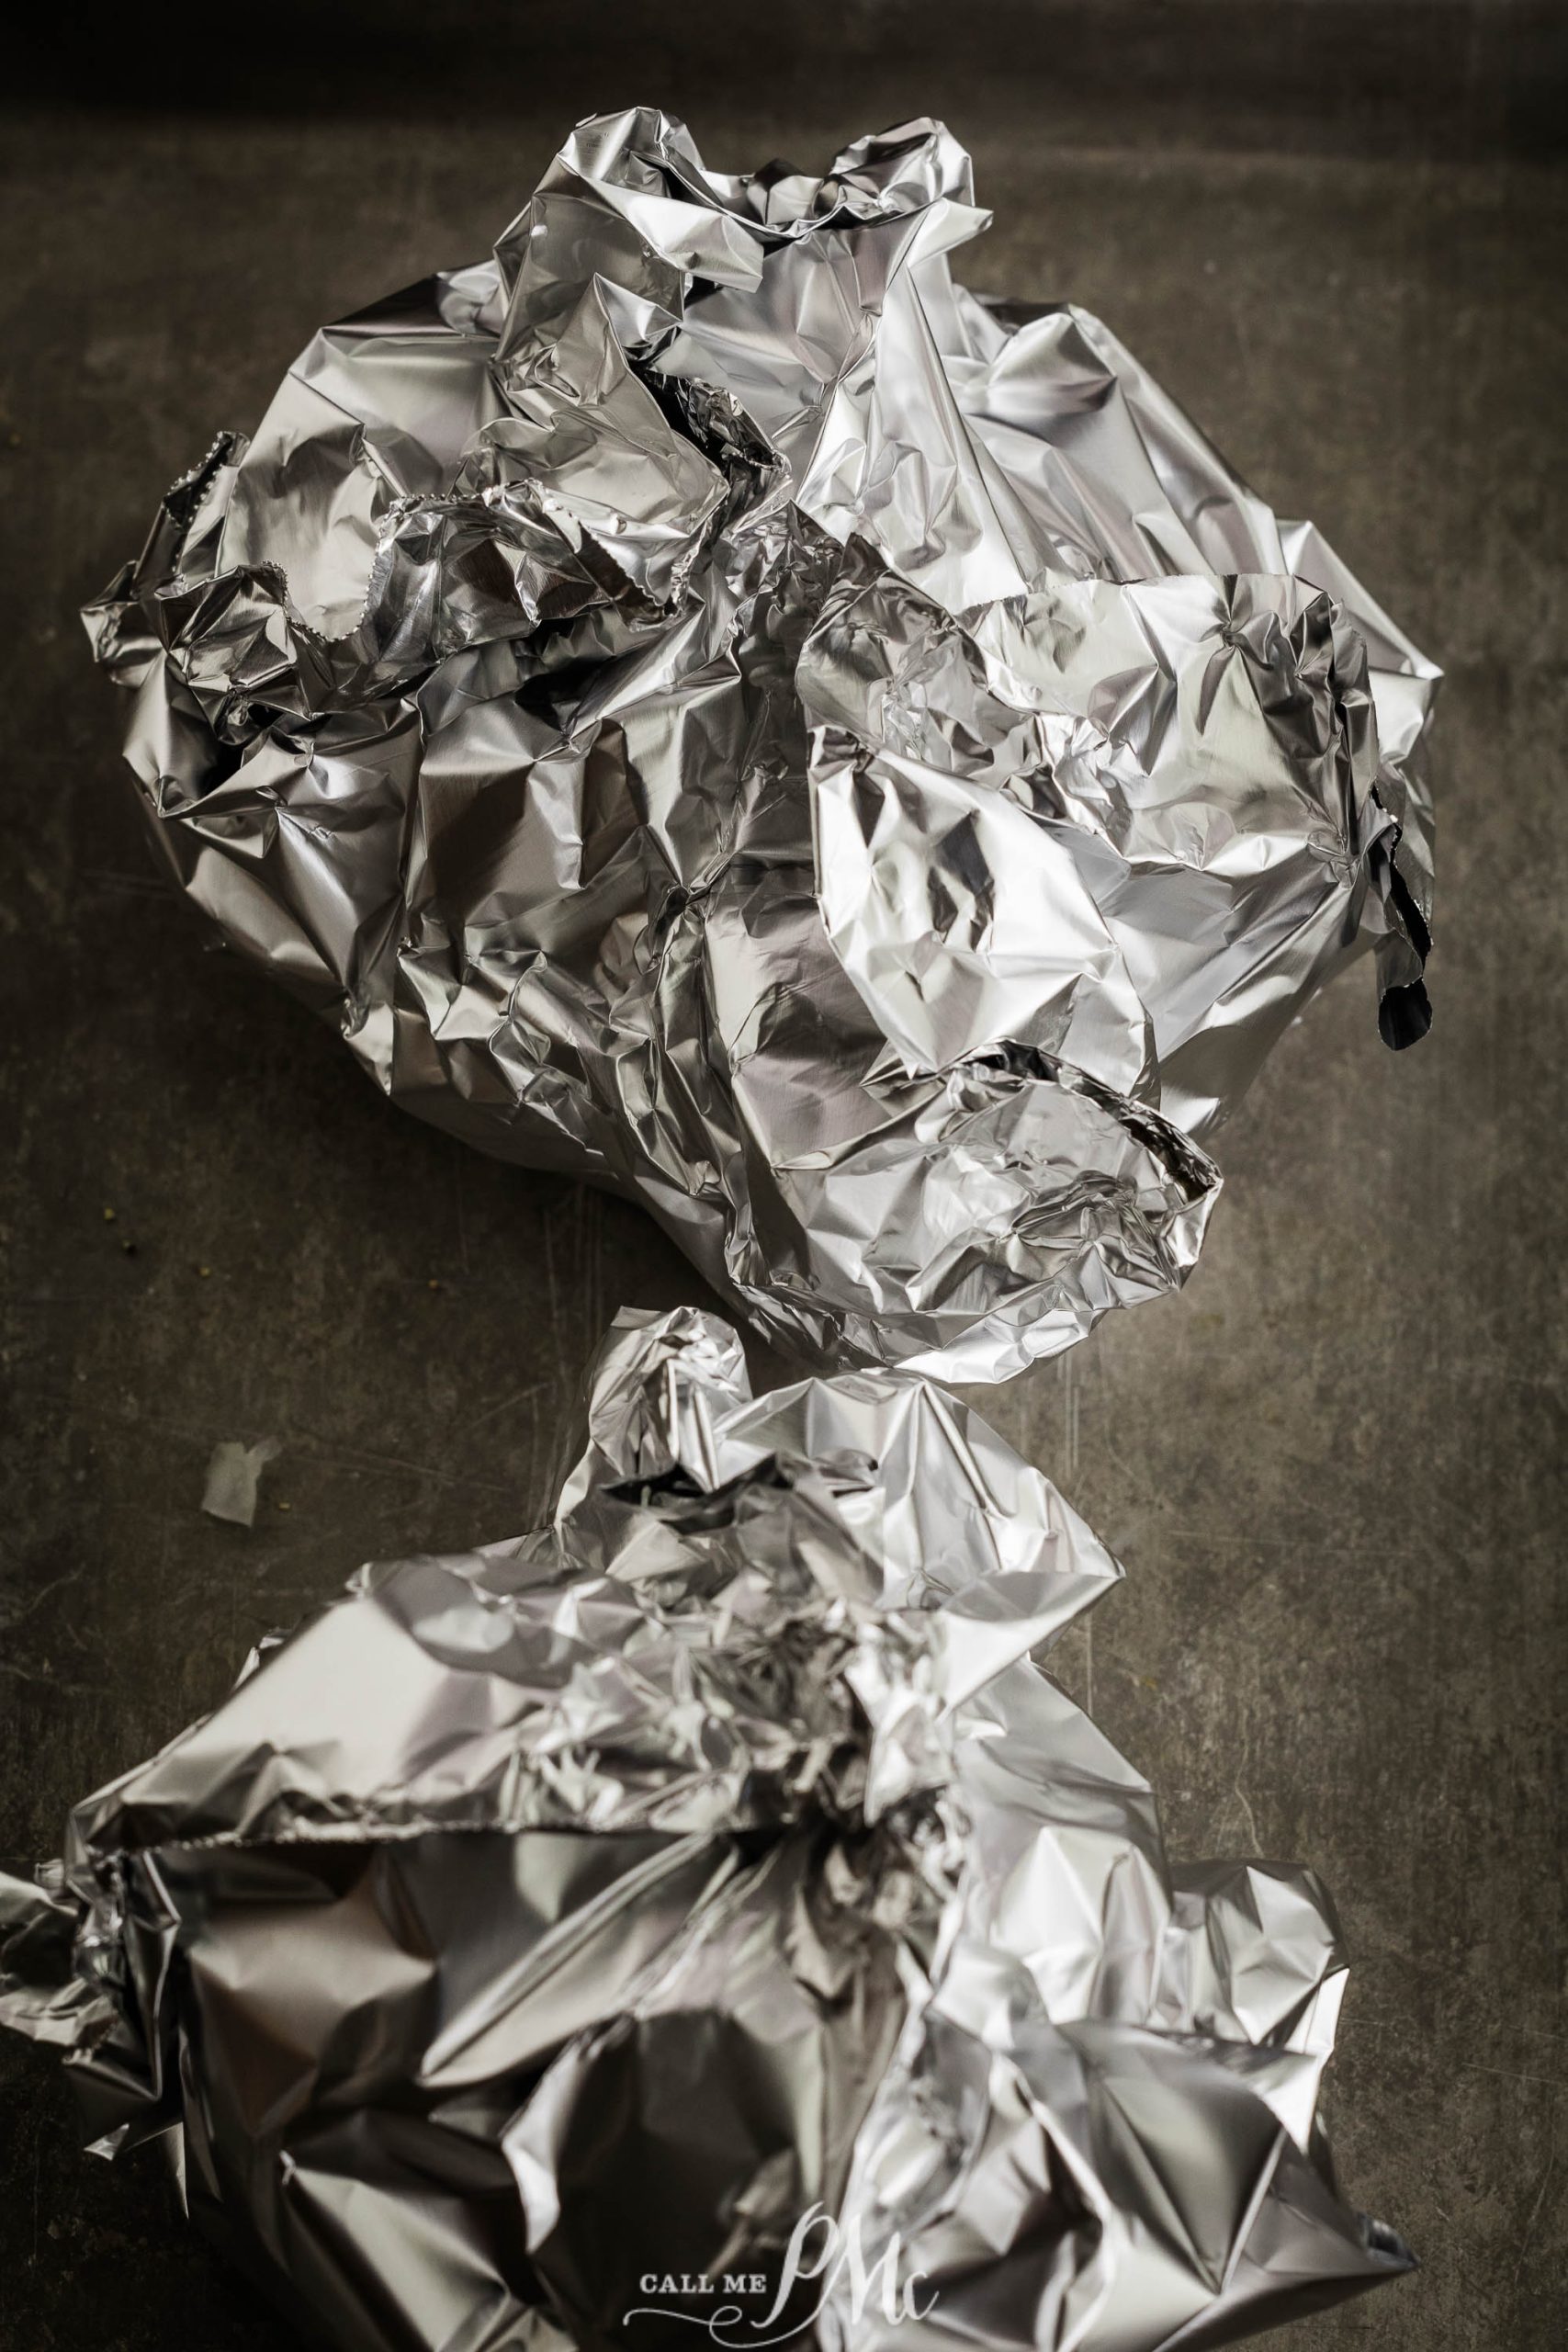 Wrinkled and balled-up pieces of aluminum foil lie on a gray surface.